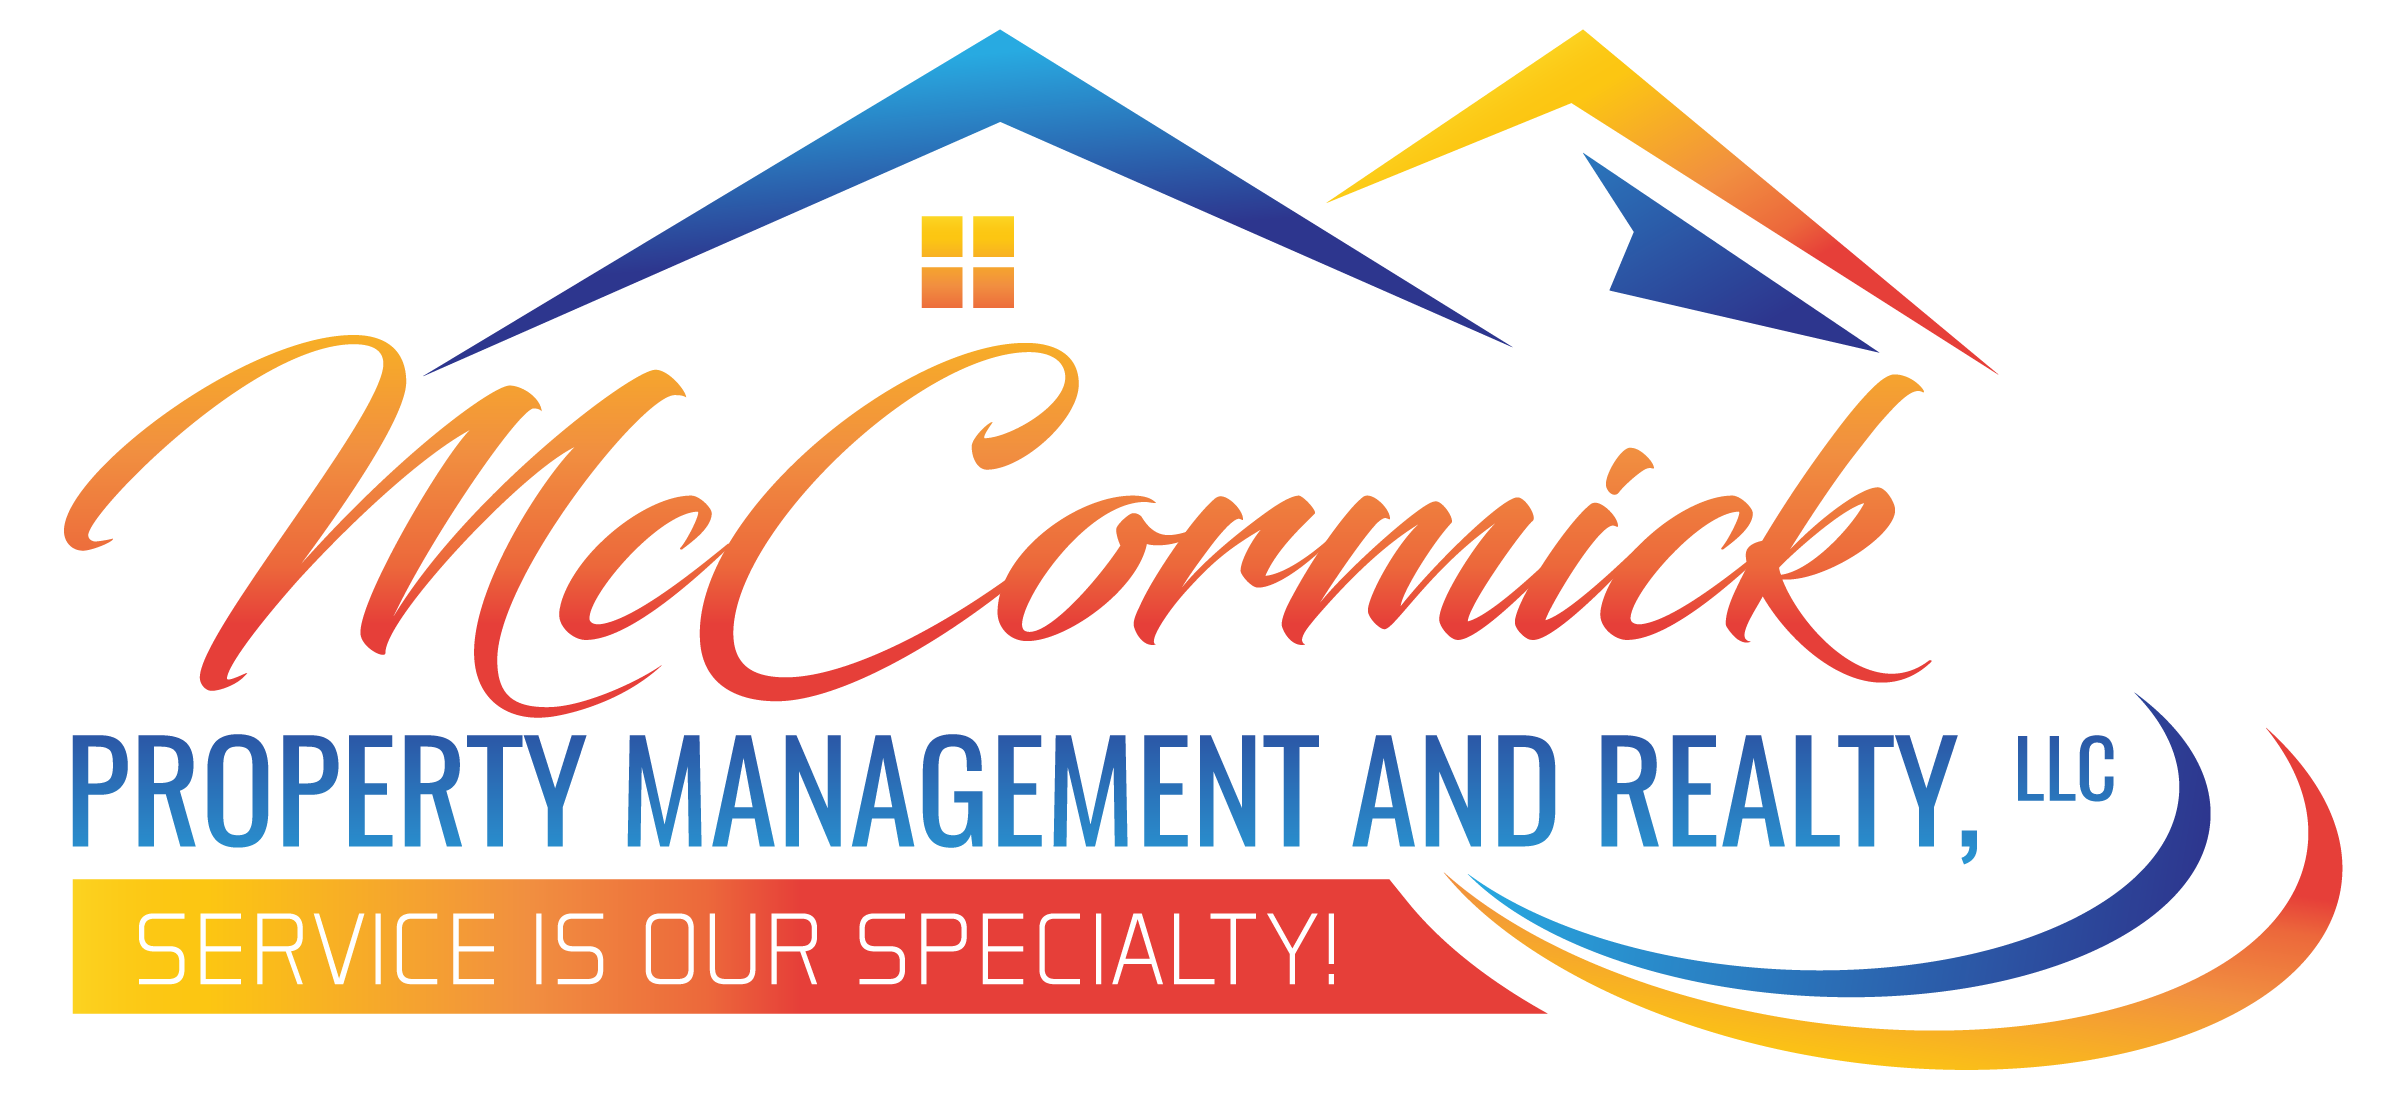 McCormick Property Management and Realty